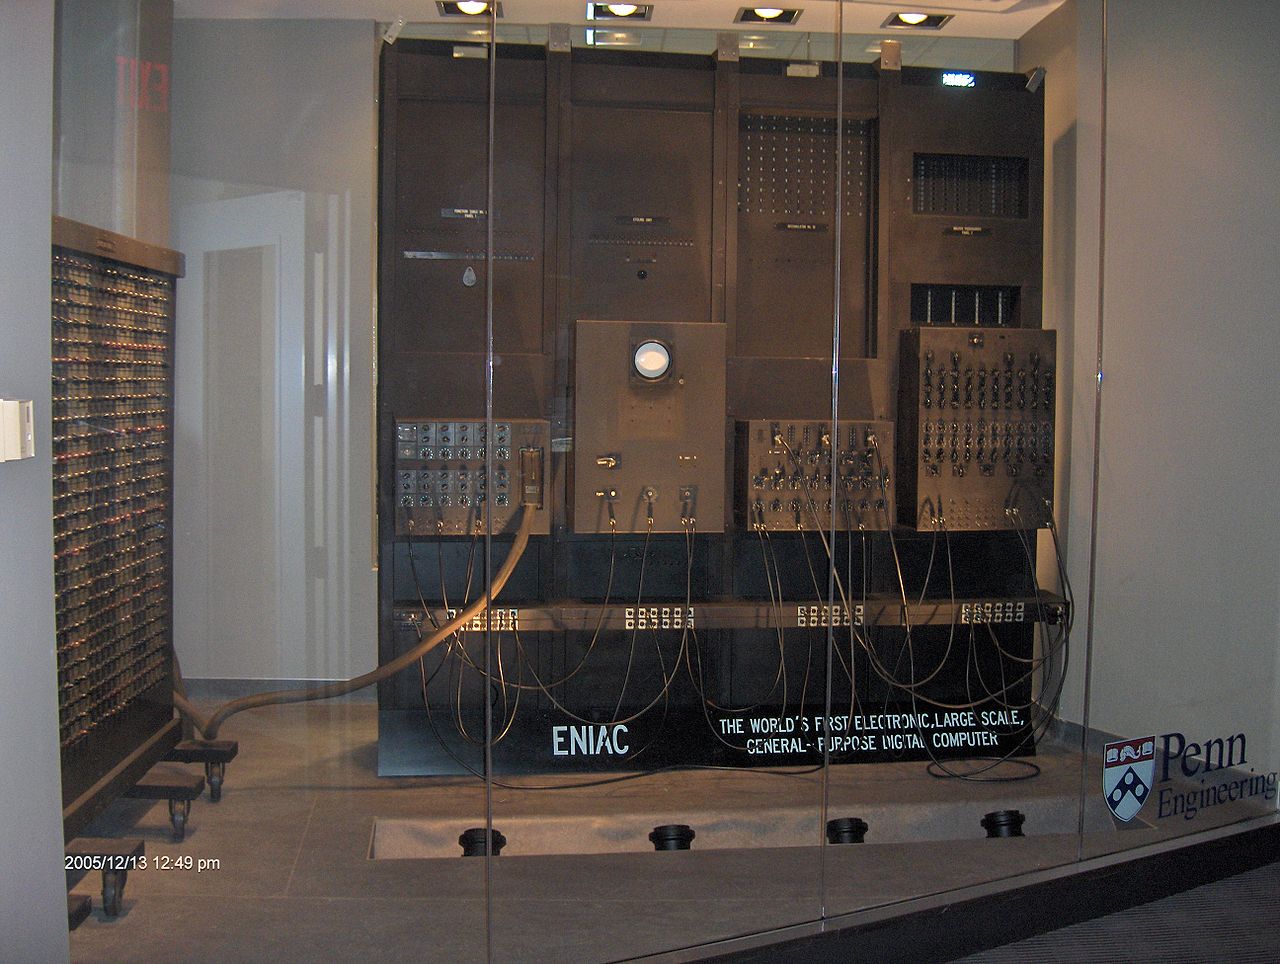 image of the ENIAC computer.